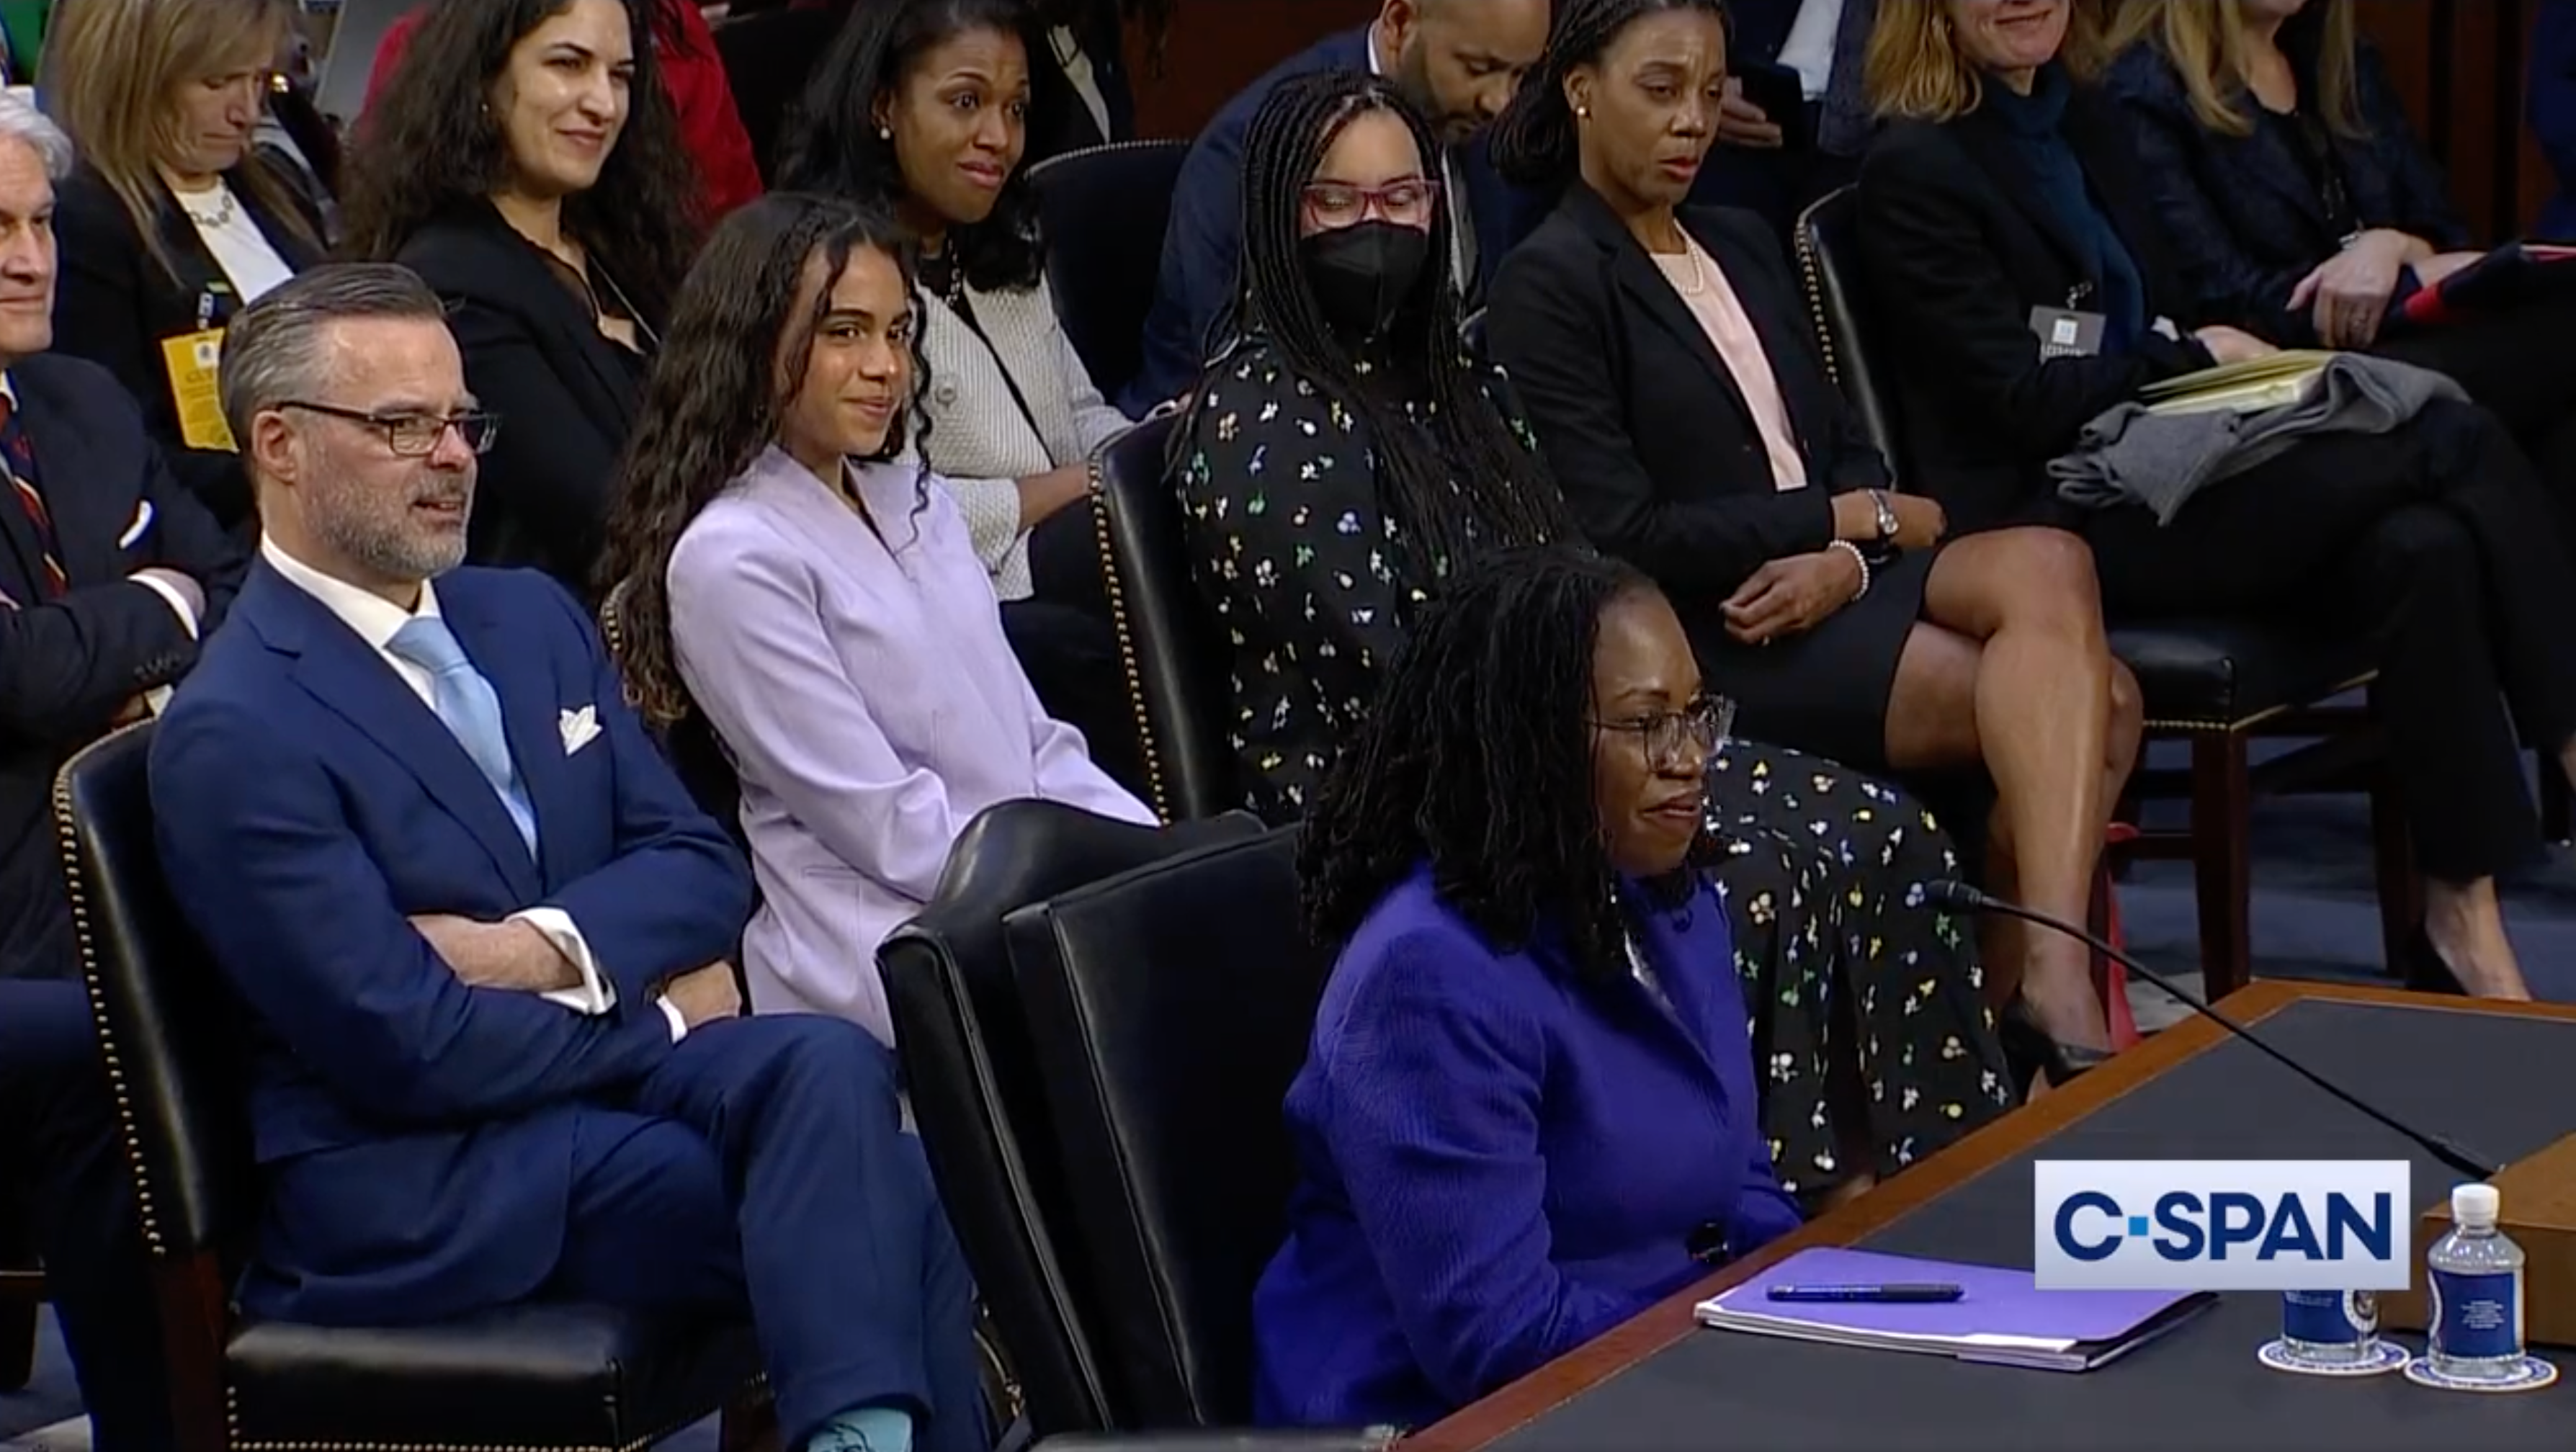 Leila Jackson, daughter of Supreme Court nominee Ketanji Brown Jackson, sits behind her mother at her confirmation hearing